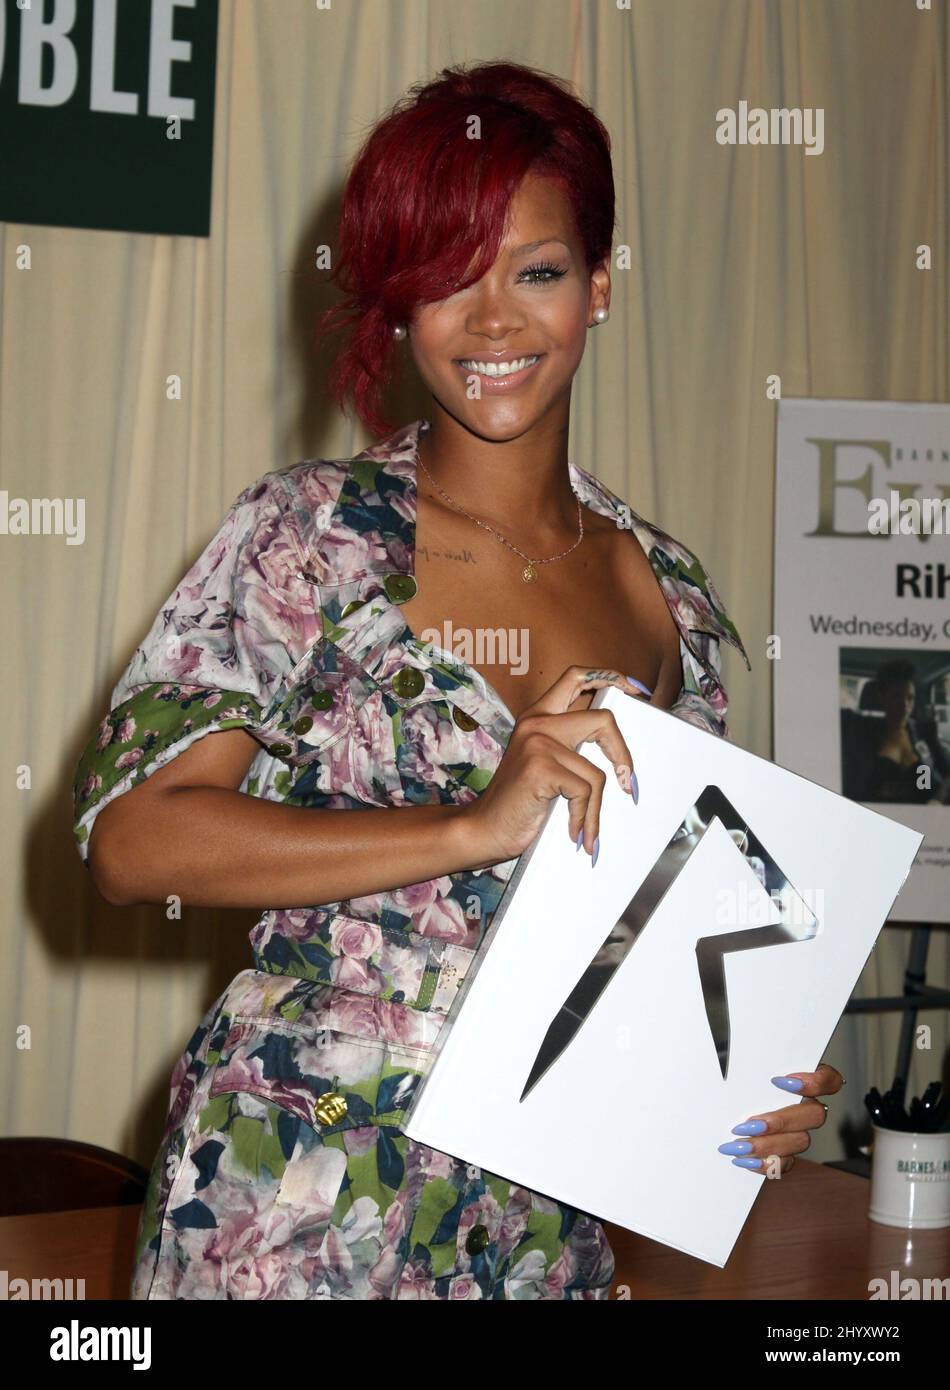 Rihanna signs copies of her new book 'Rihanna: The Last Girl on Earth' at Barnes and Noble store on 5th Avenue in New York, USA. Stock Photo